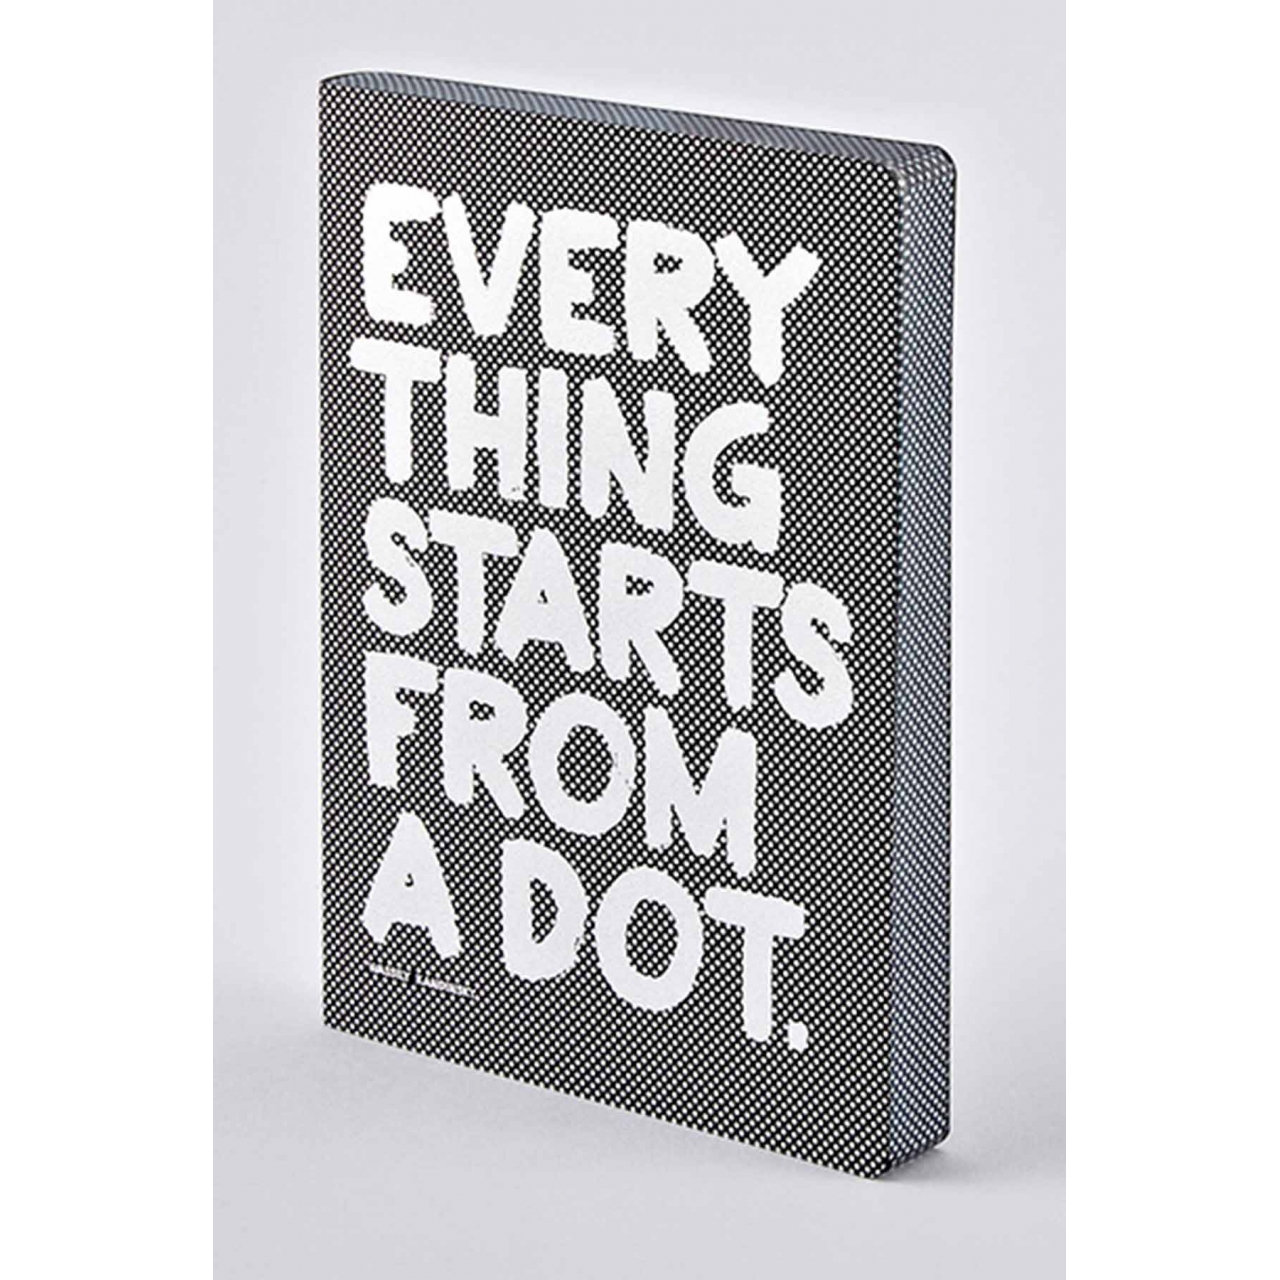 nuuna - EVERYTHING STARTS FROM A DOT